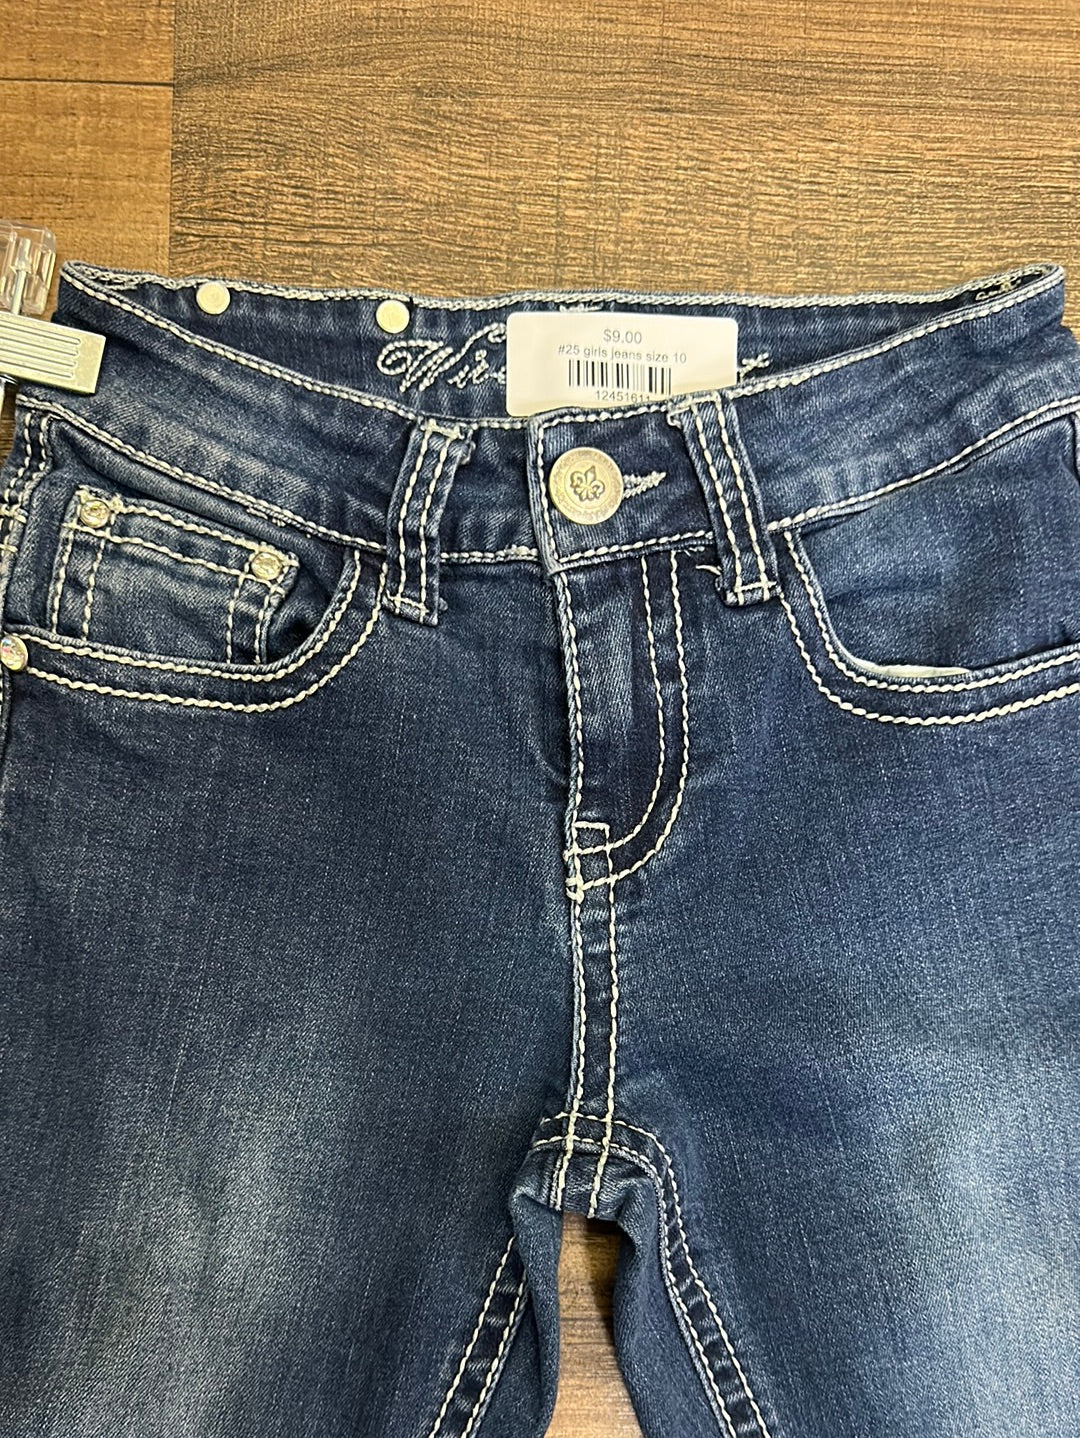 #25 girls jeans size 10